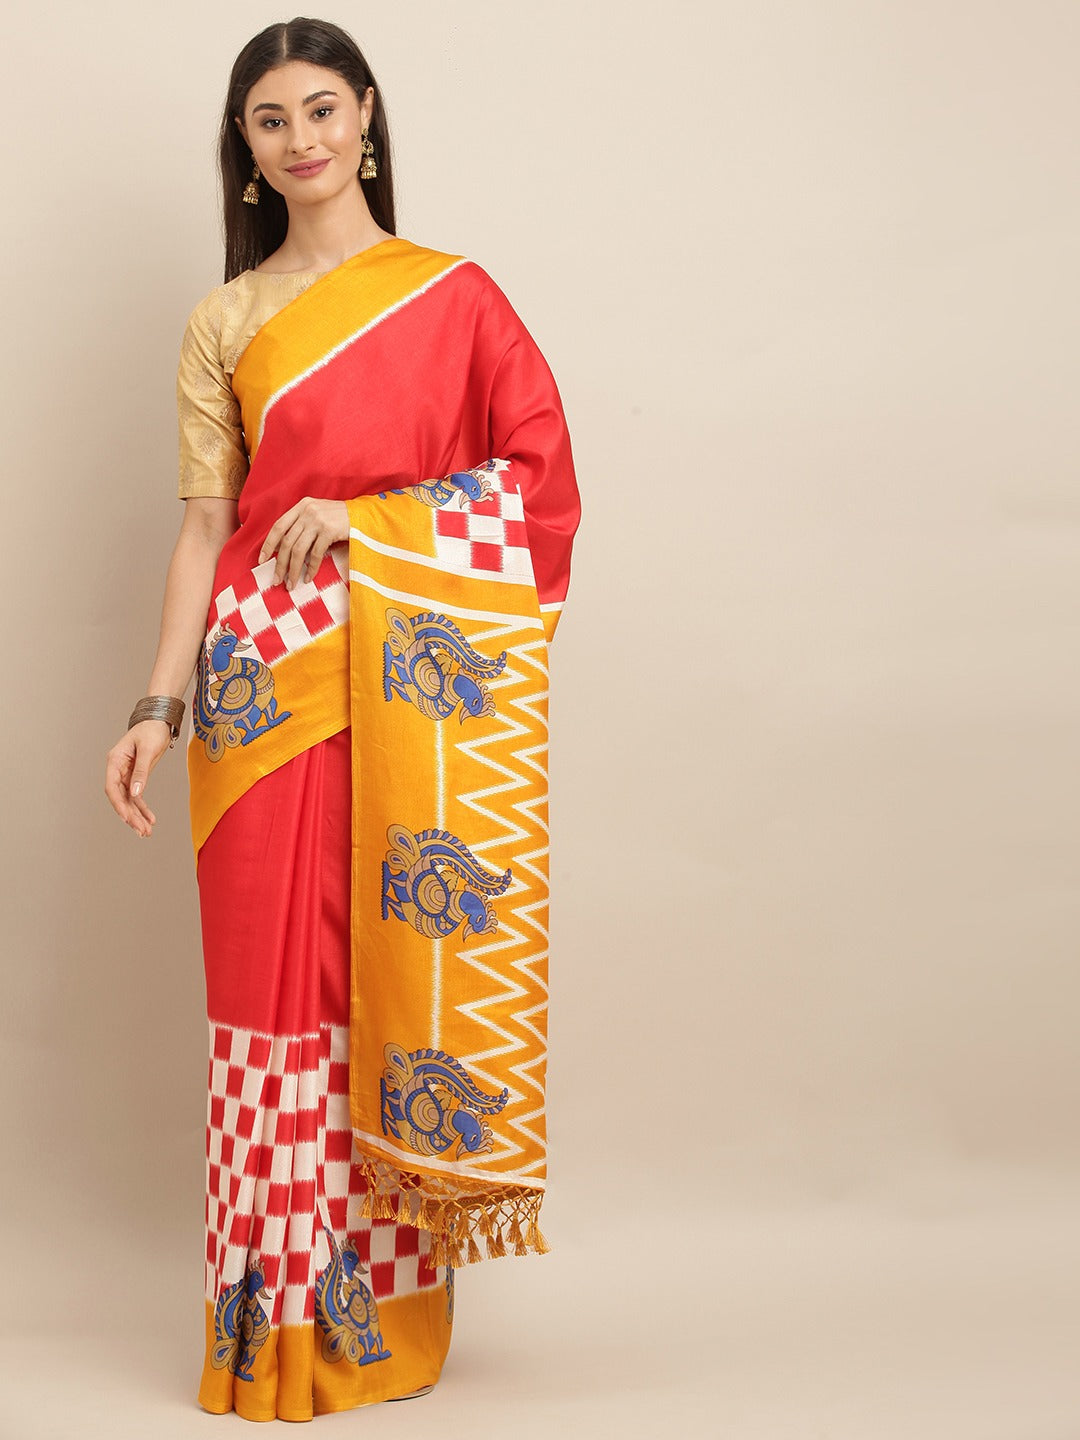 Ikat Linen Red Colour Saree With Ethnic Motifs Printed 